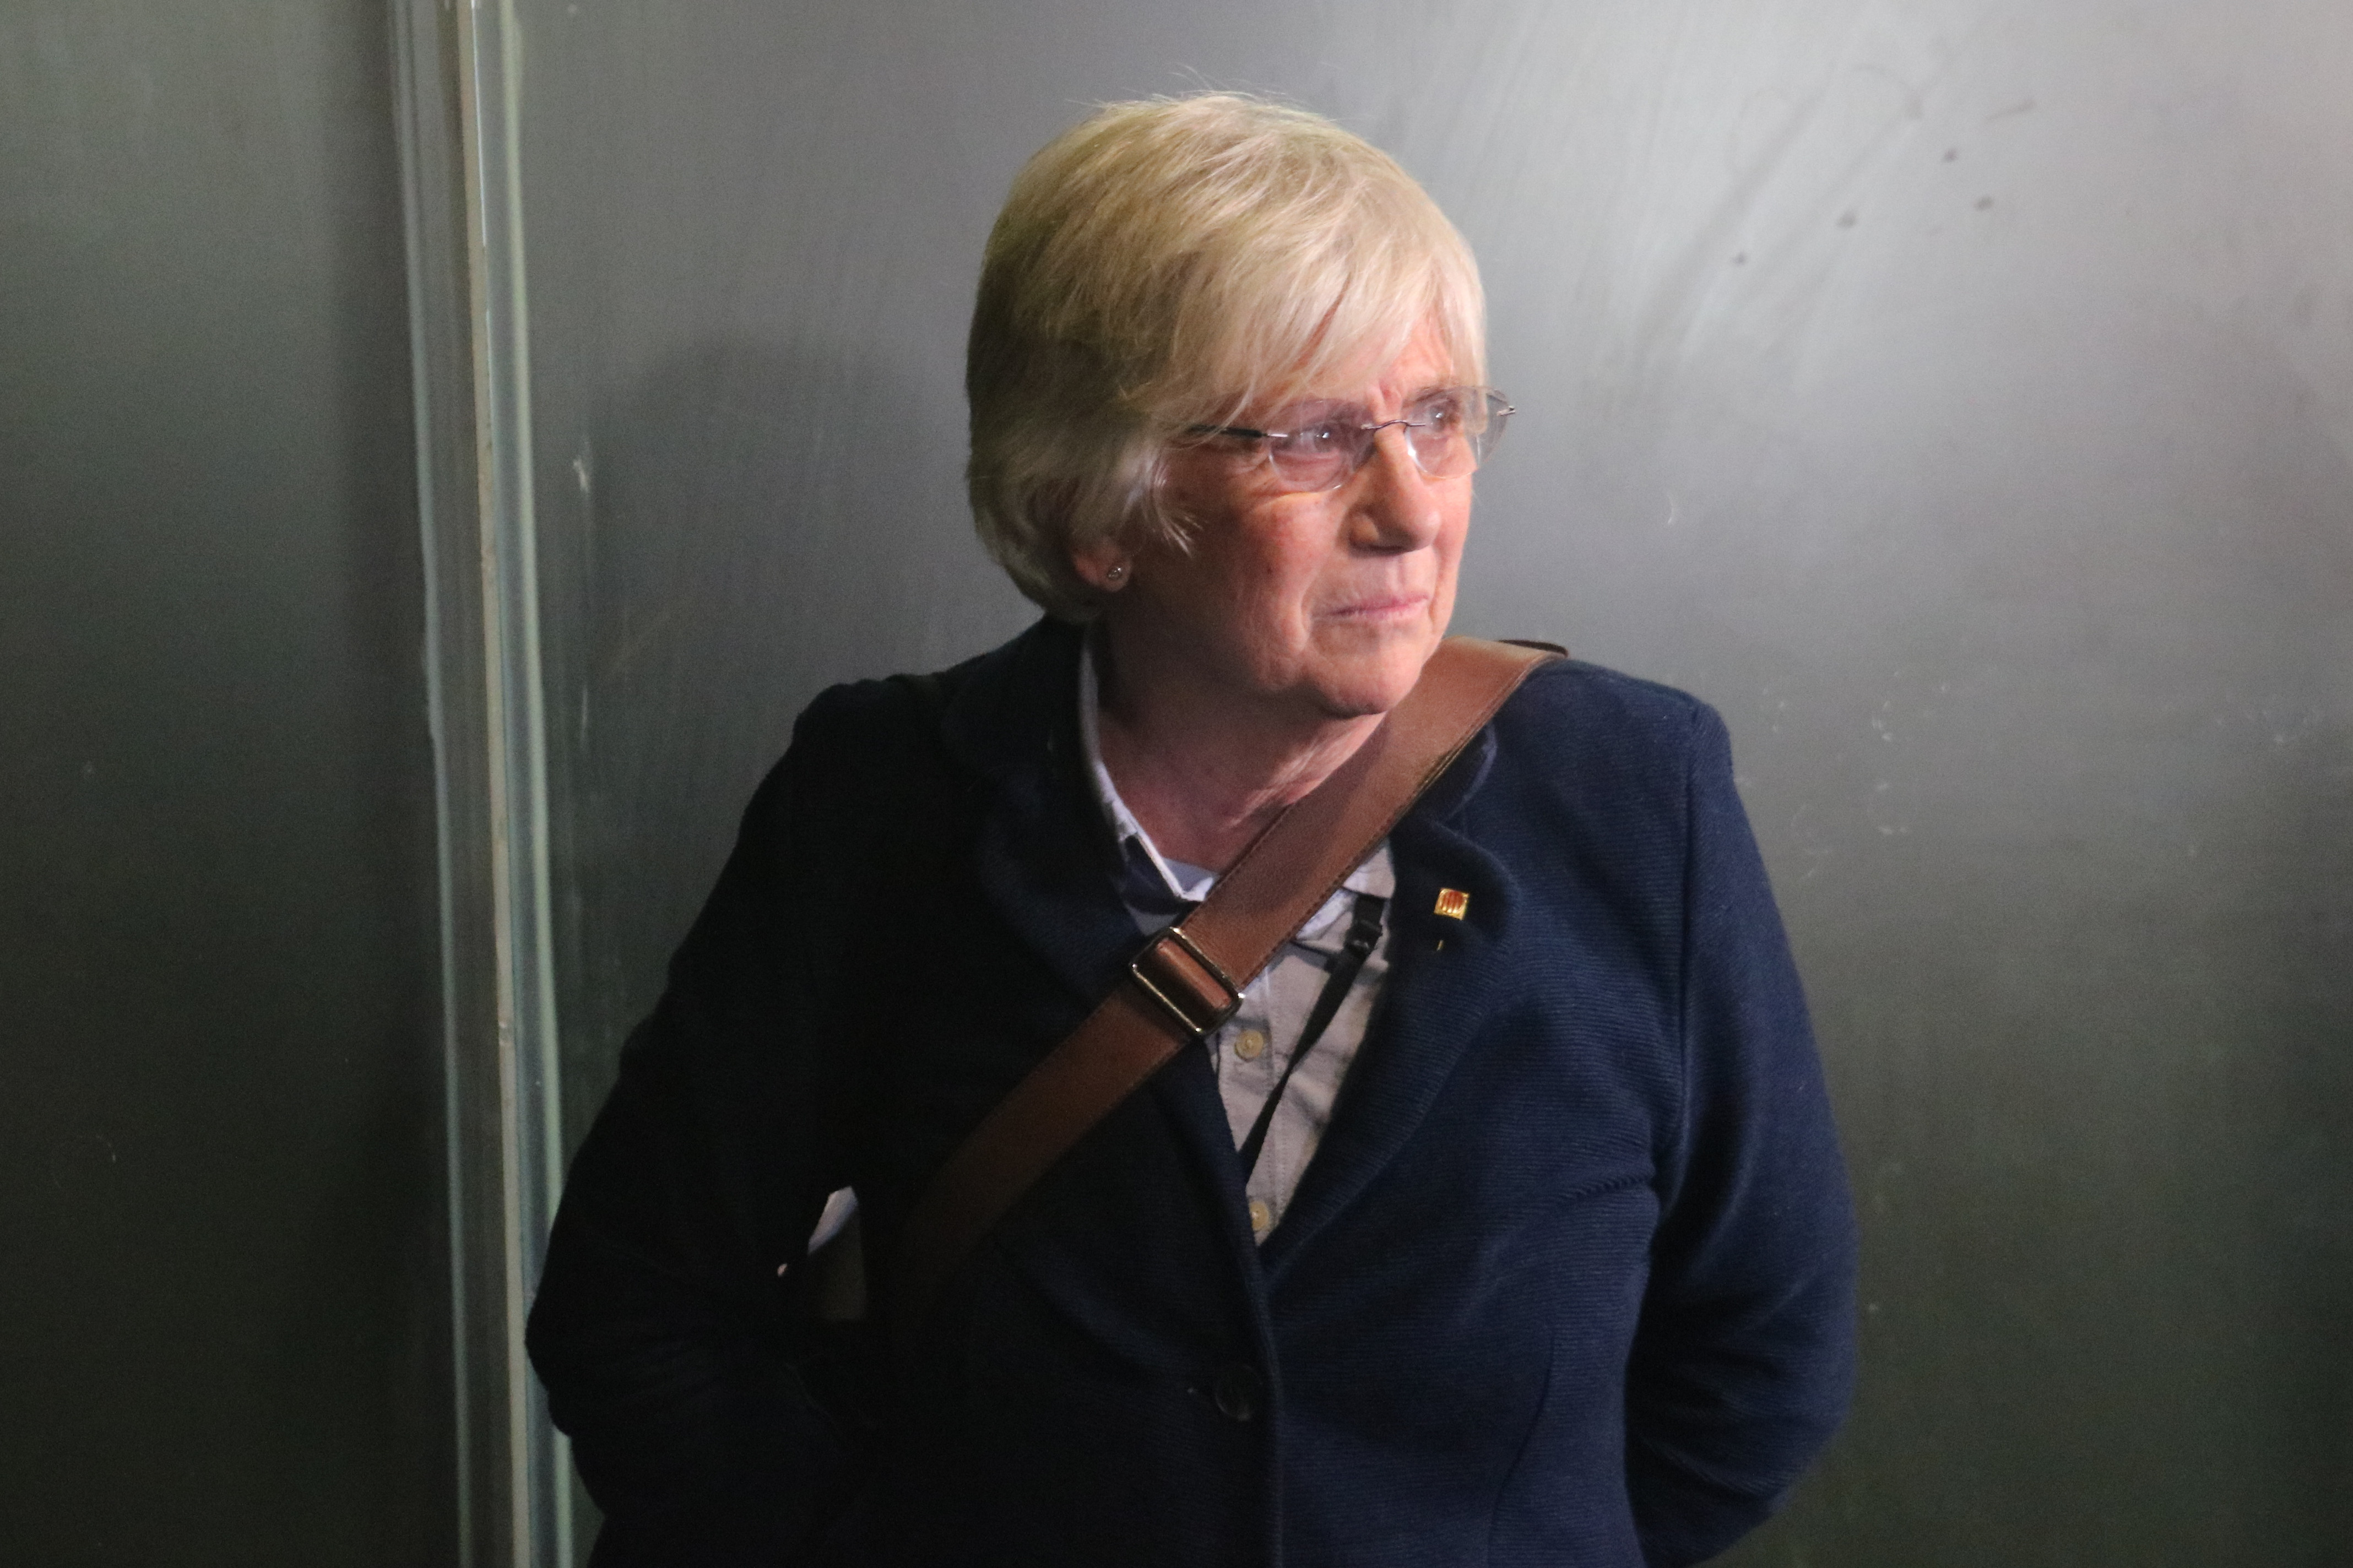 Former Catalan education minister Clara Ponsatí after appearing before a judge in Barcelona on March 28, 2023